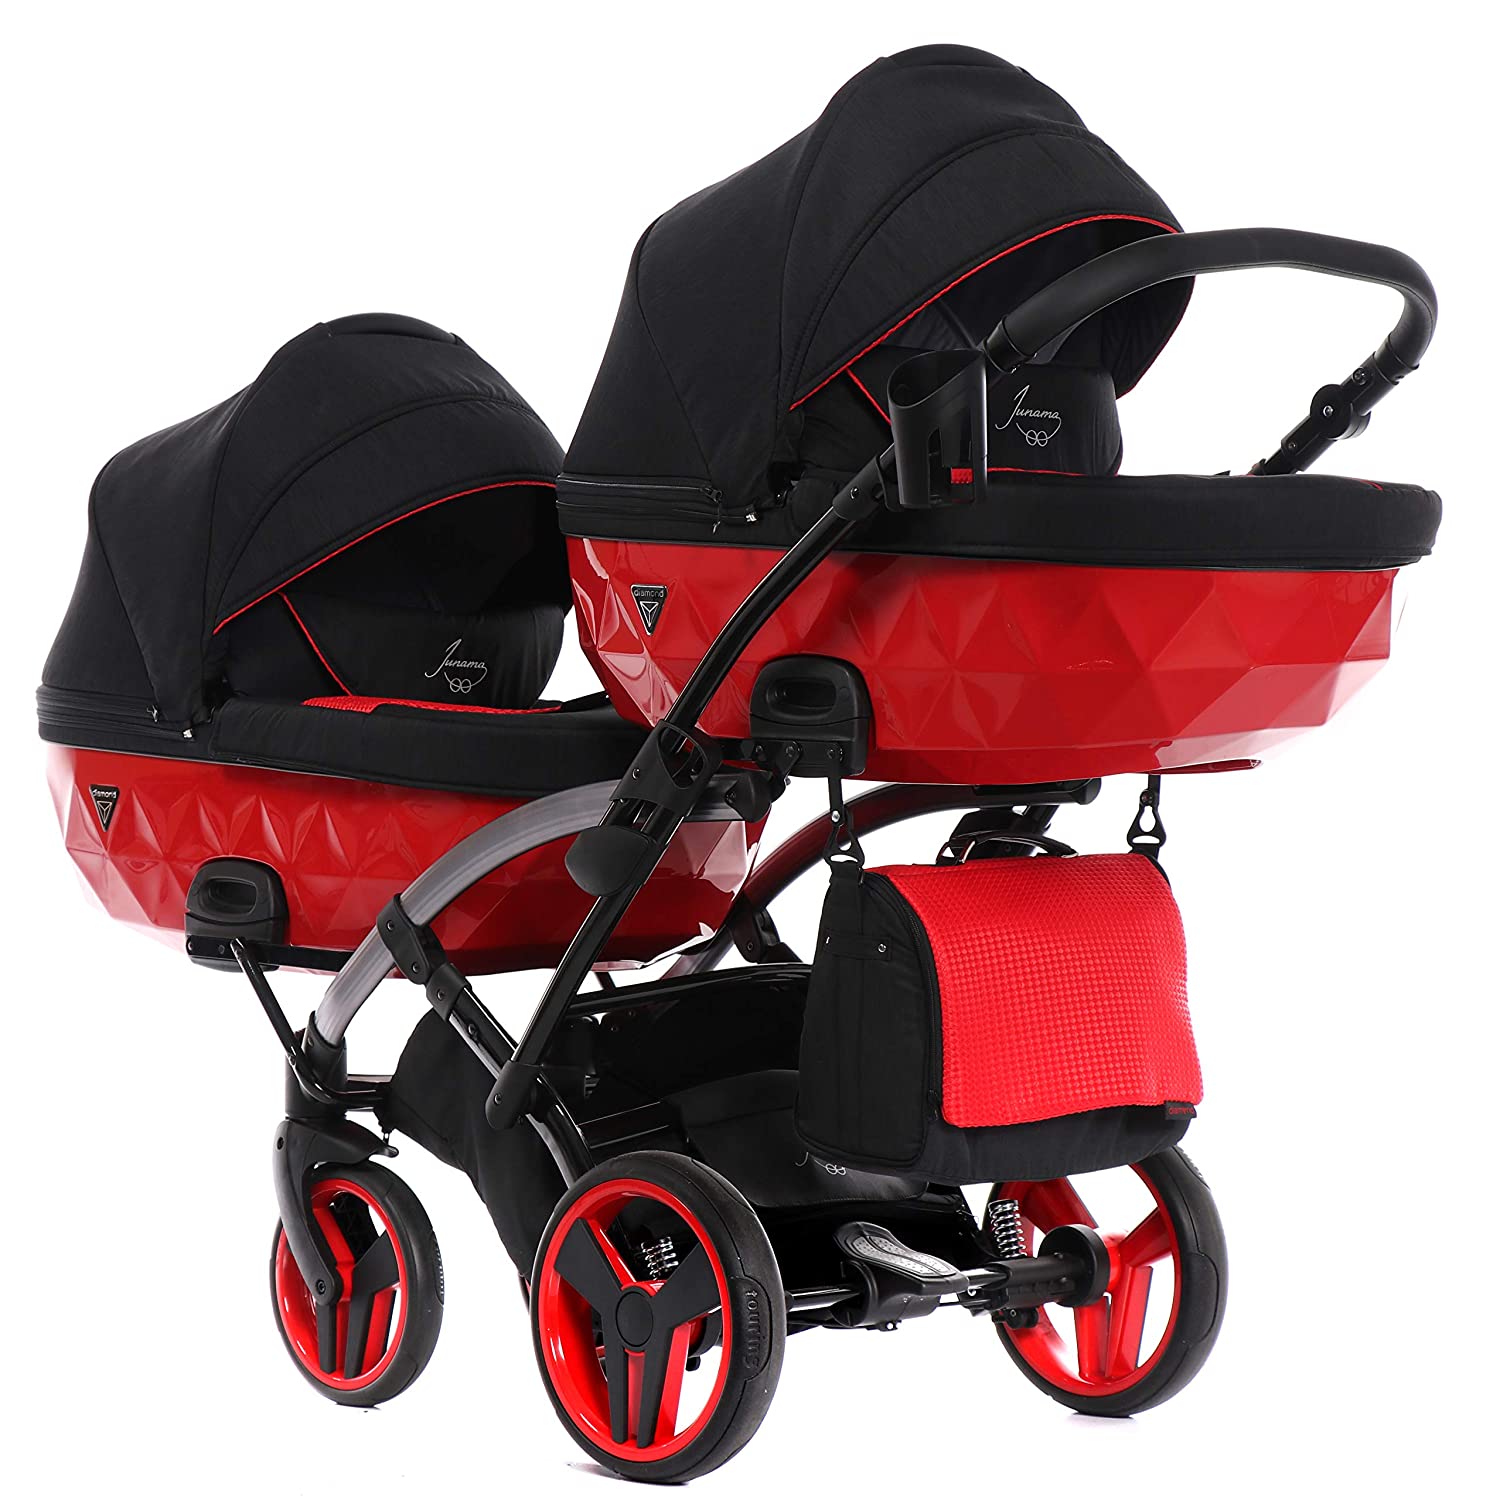 Twin Junama Duo Slim s-Line Pushchair (01. Black/Red and Silver, 3-in-1)